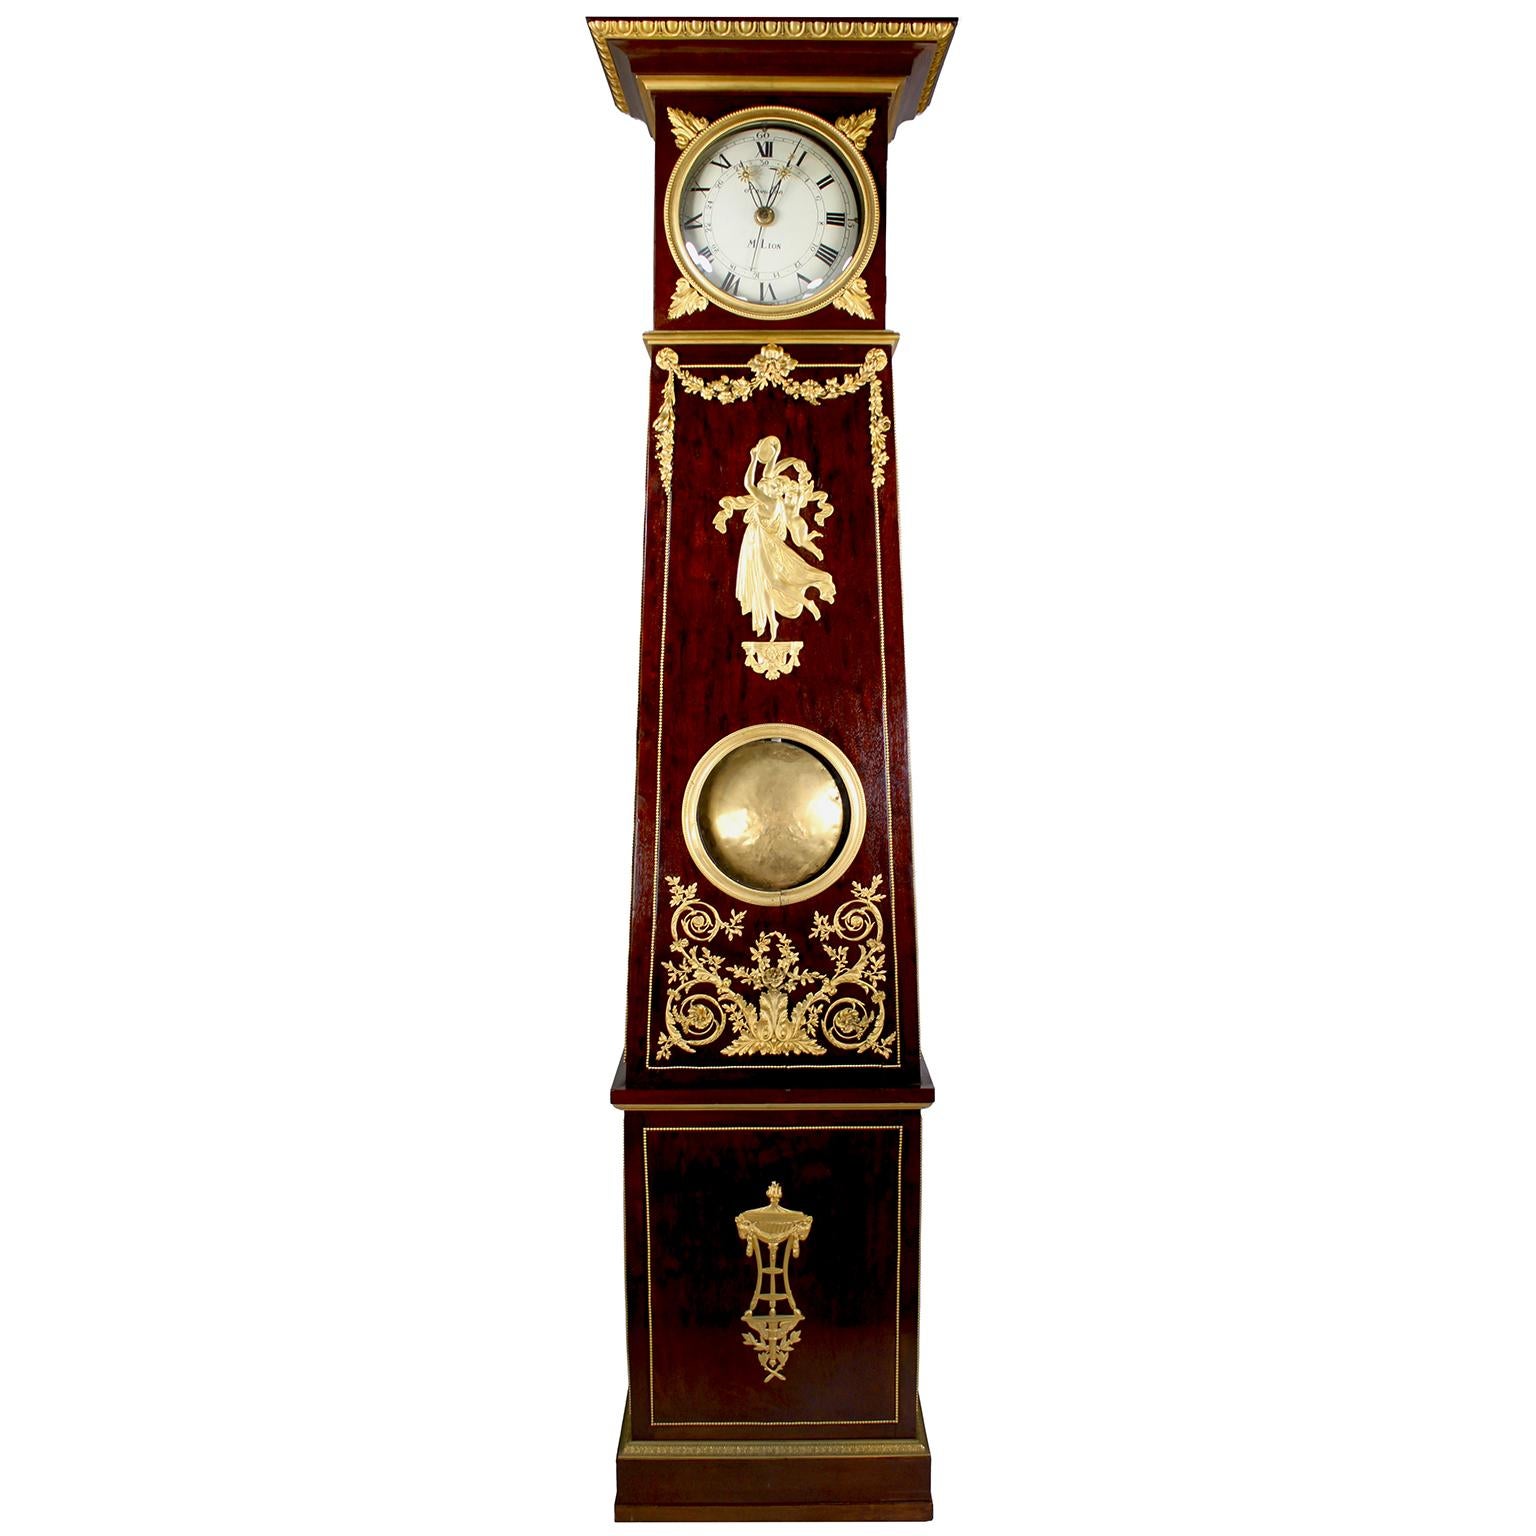 A Very Fine French 19th Century Louis XVI Style Plum-Mahogany and Ormolu Mounted Tall-Case Regulator attributed to Revollon. The Roman numeral dial signed: Revollon - M. Lion, with hands ending in the shape of a sunburst, the tall and slender case